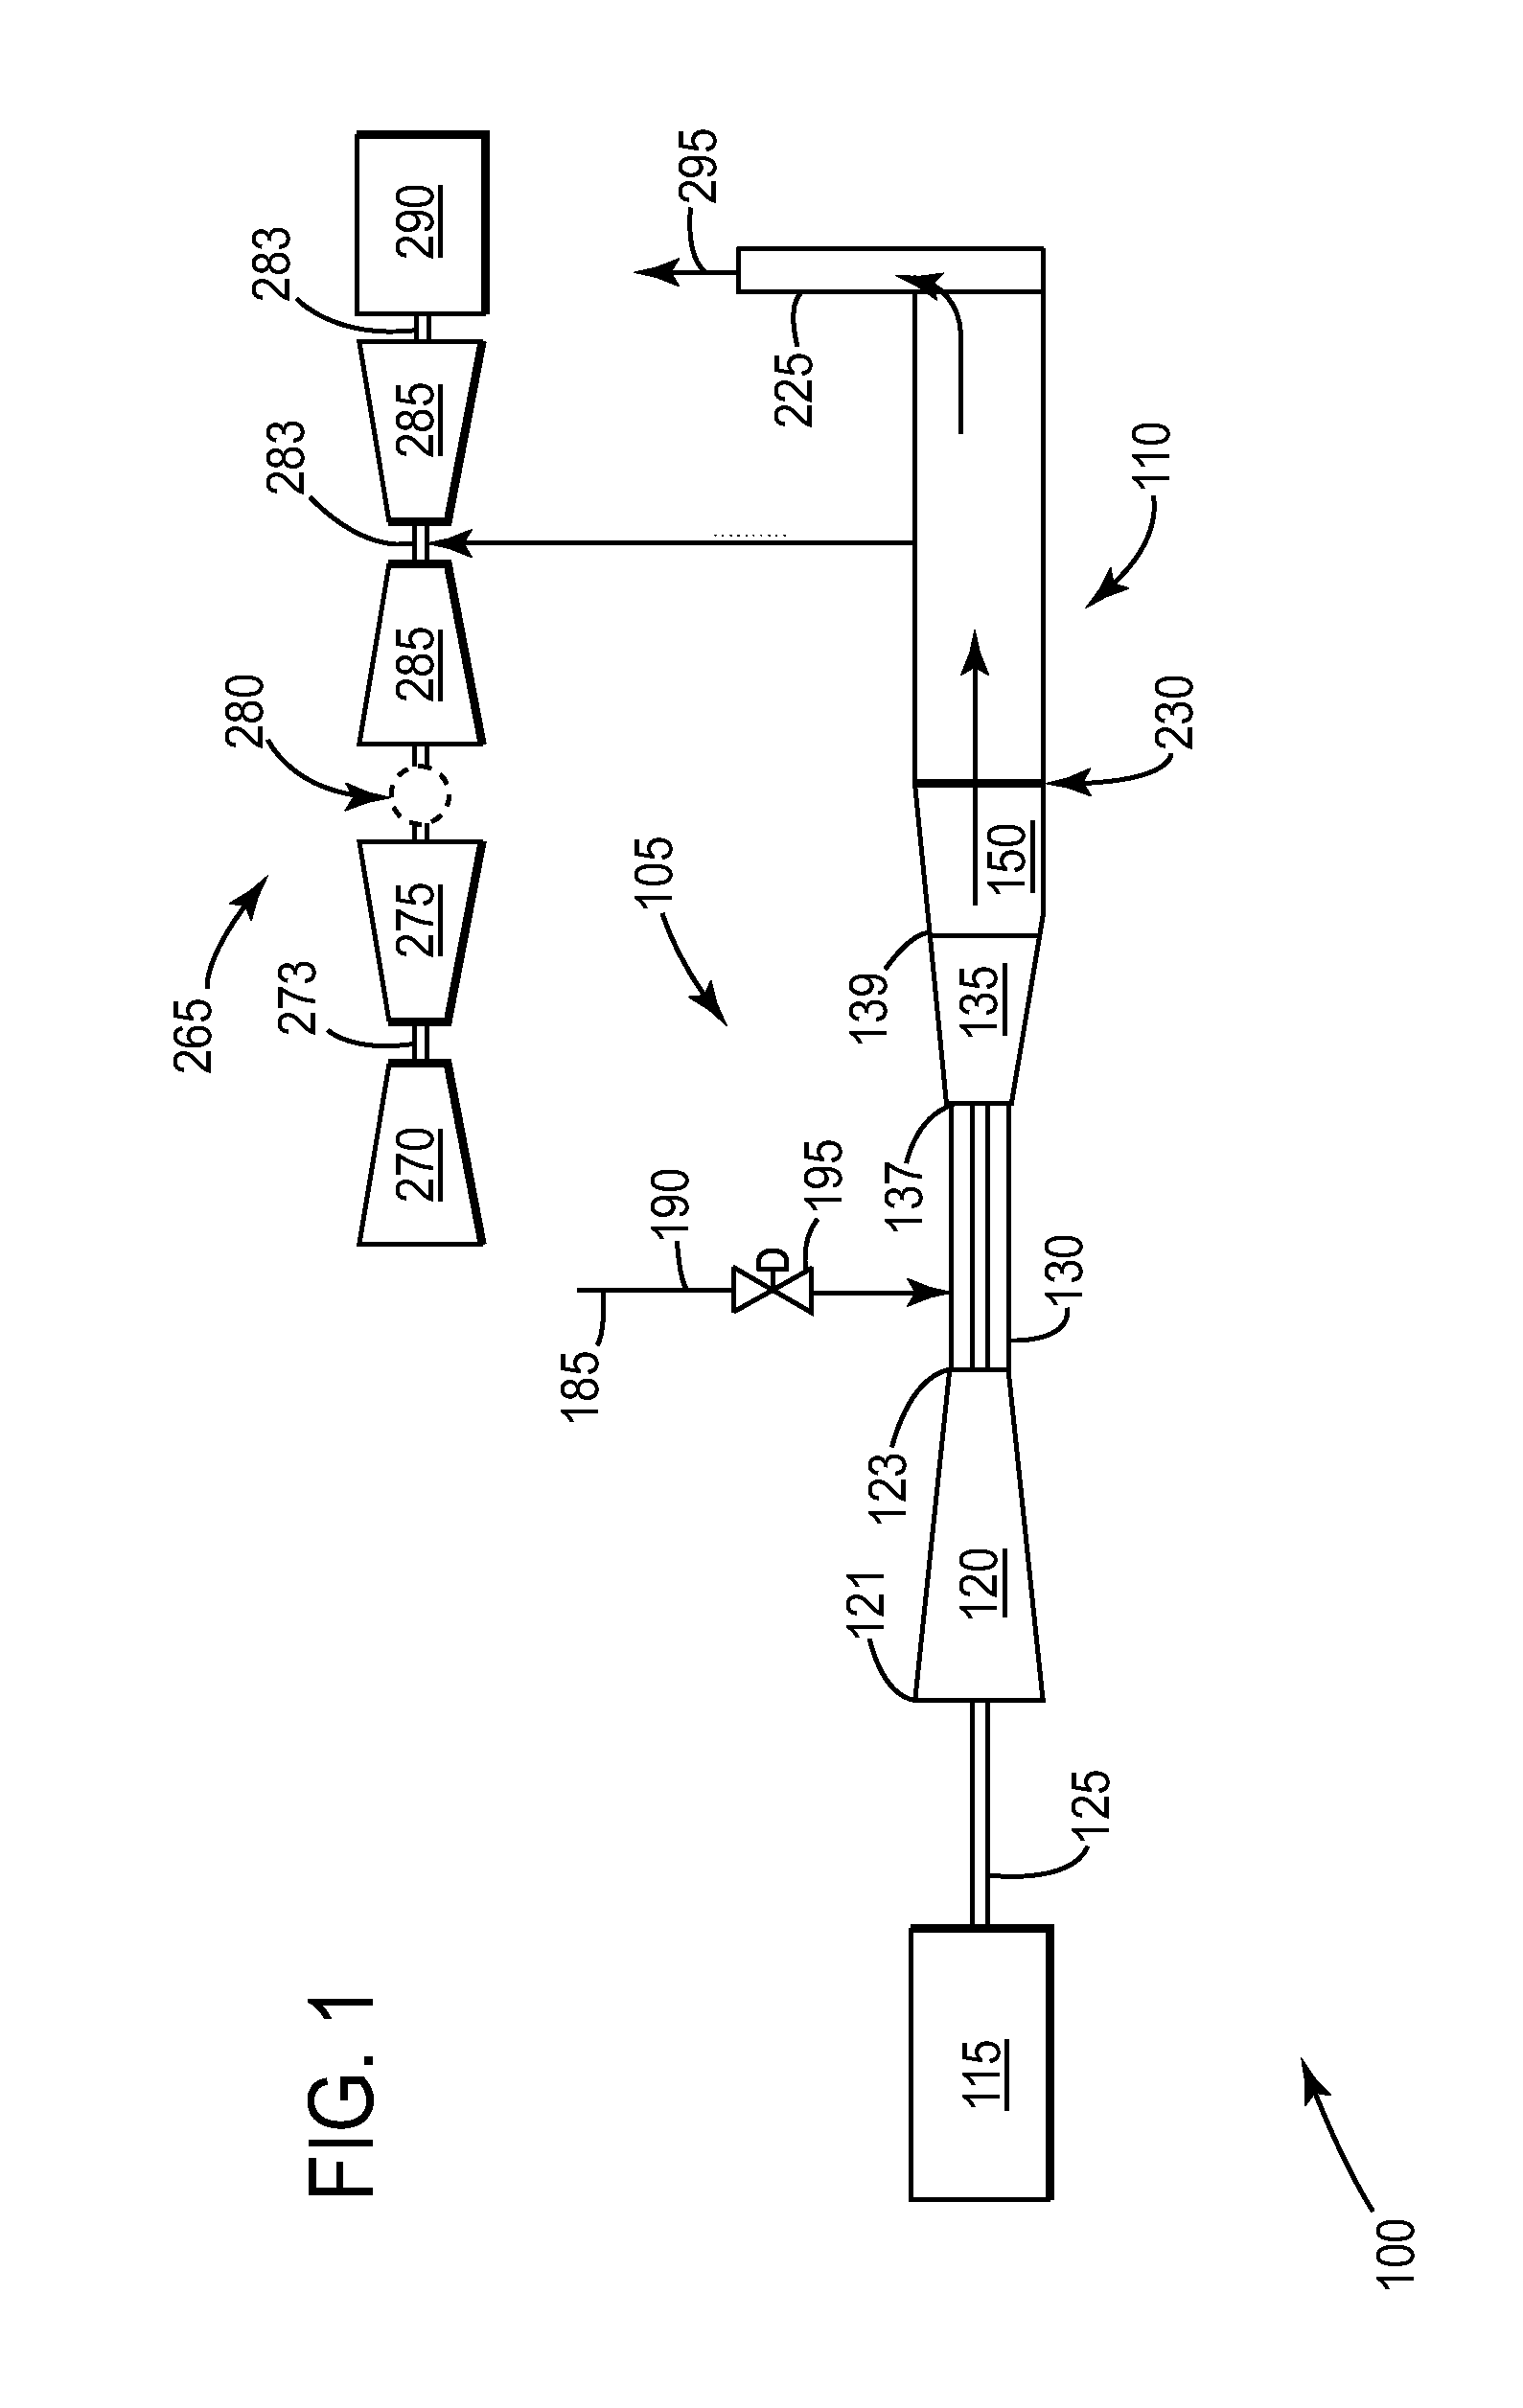 Method and system for controlling a powerplant during low-load operations